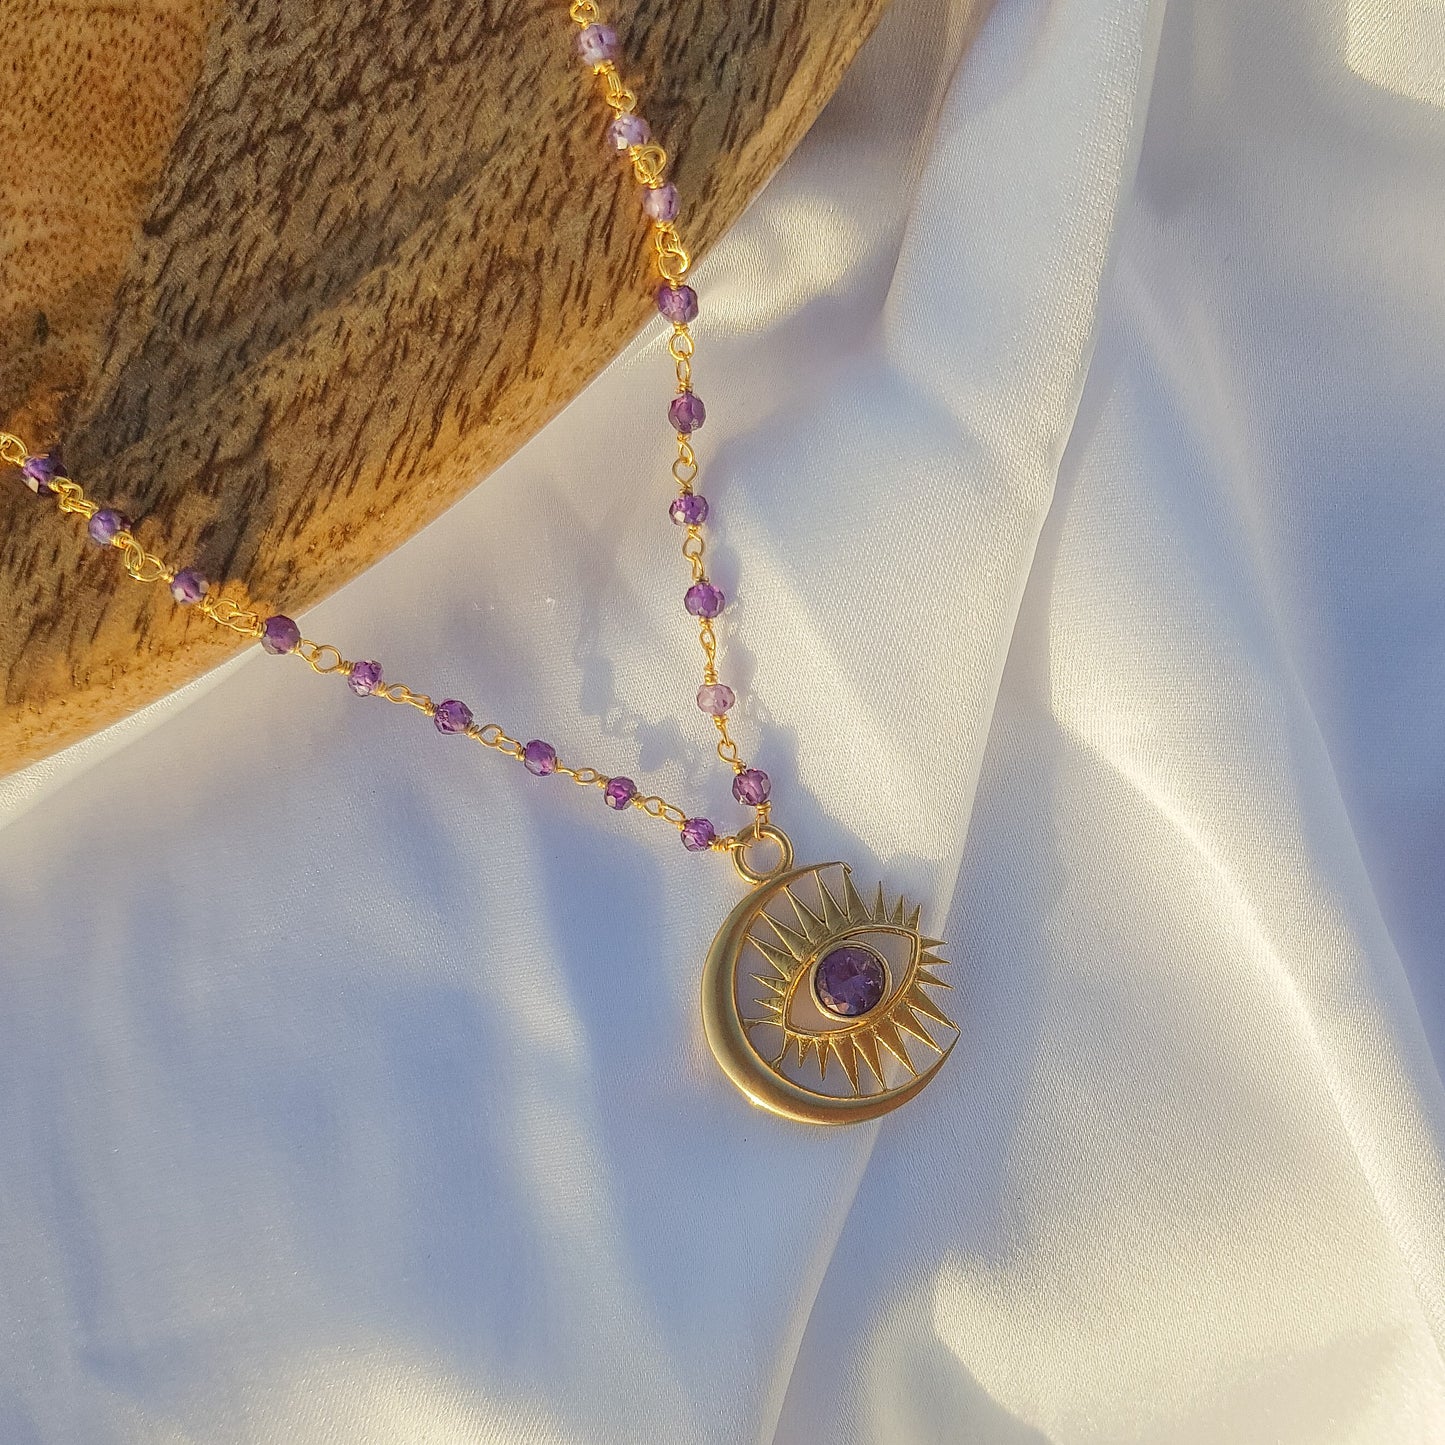 Amethyst beaded necklace with Evil Eye Crescent Moon charm in 22k gold plated 925 sterling silver